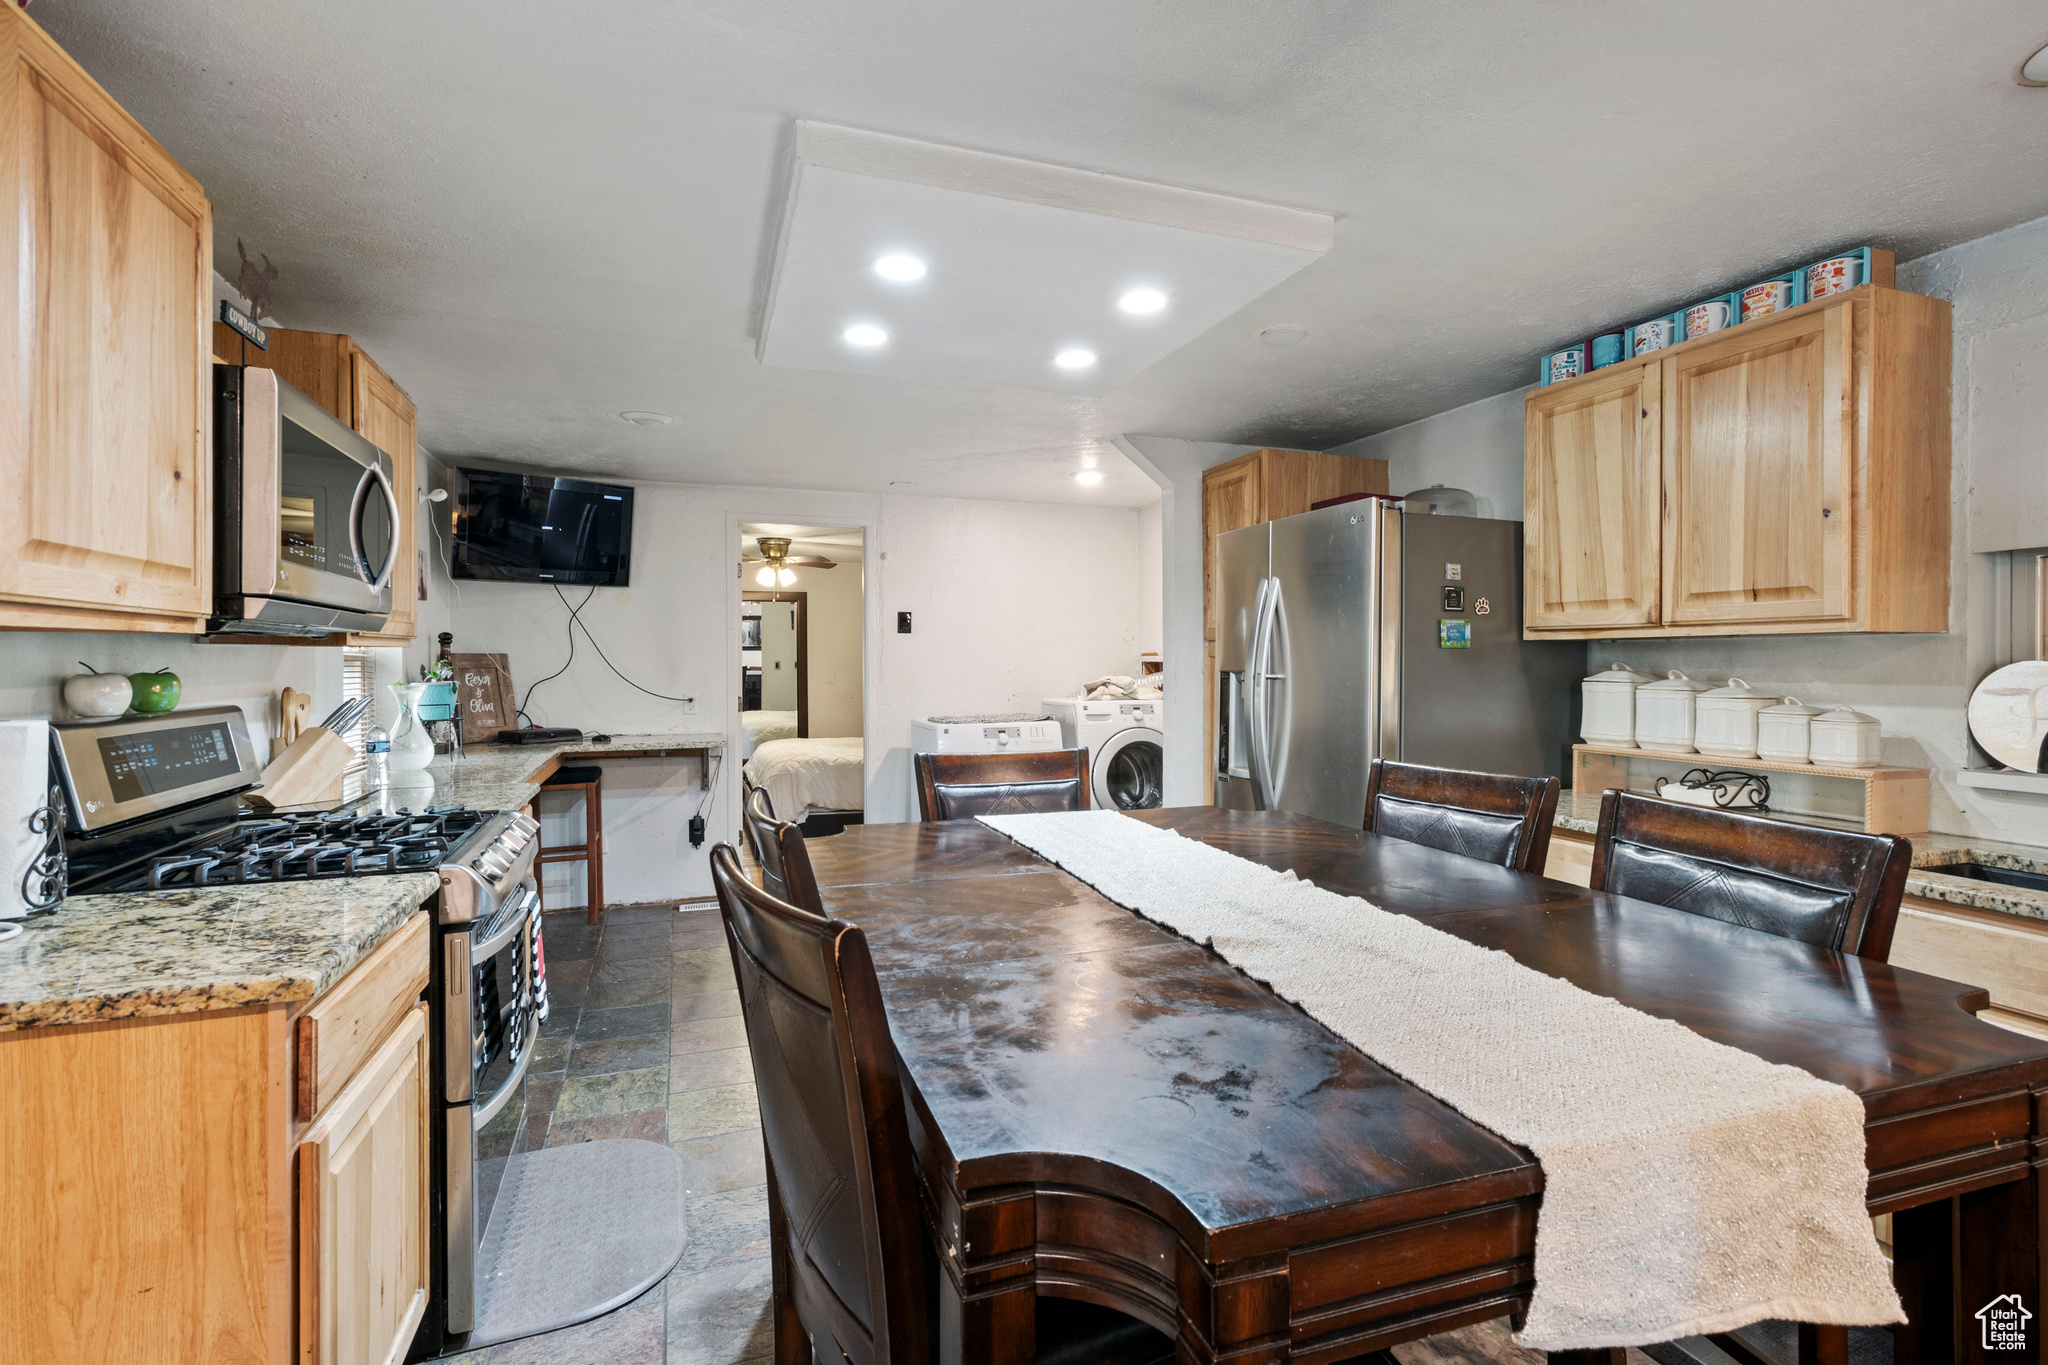 Kitchen with washer / clothes dryer, light brown cabinetry, stainless steel appliances, tile flooring, and ceiling fan